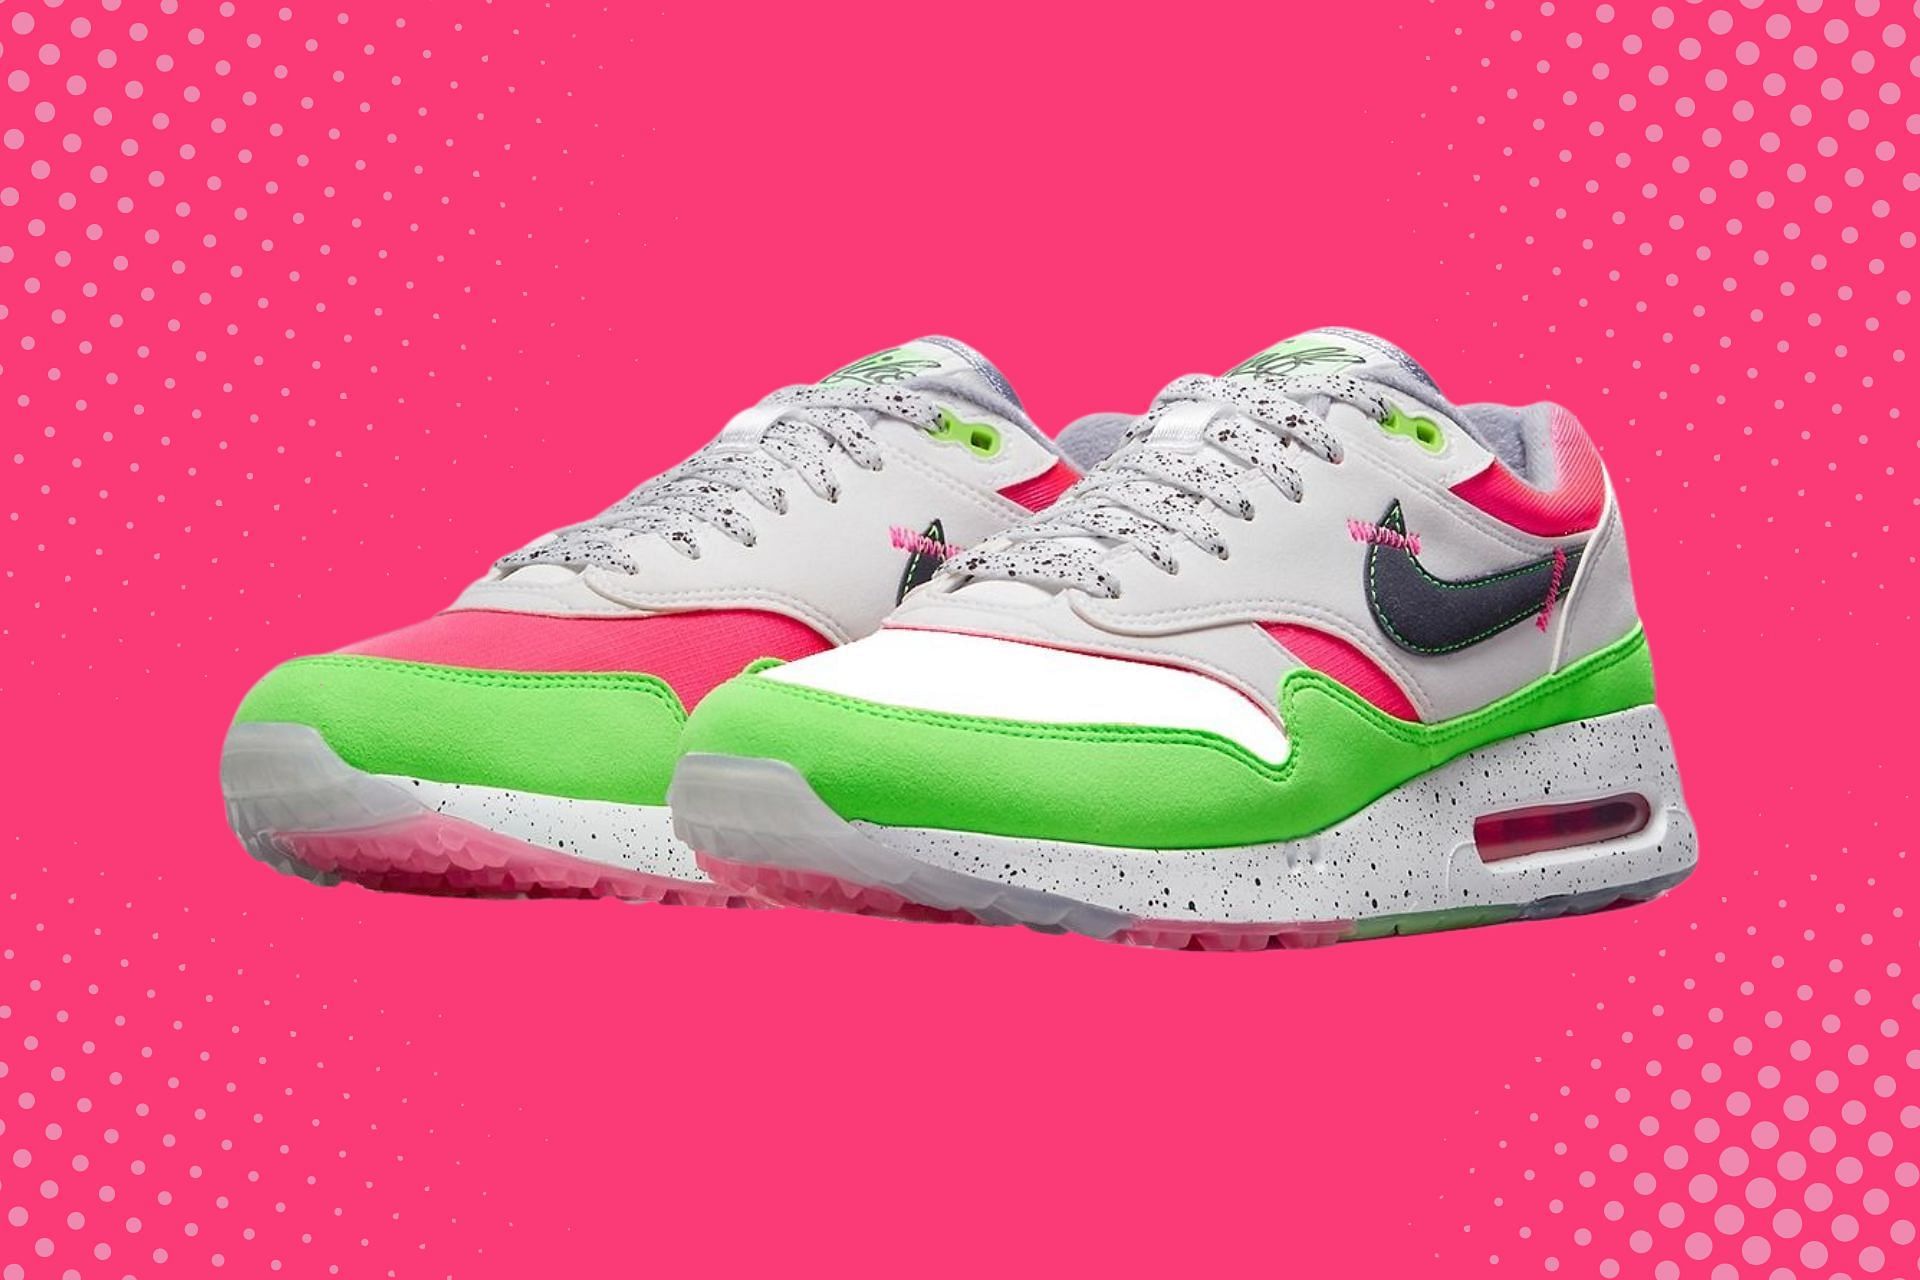 consumptie Harde wind browser Watermelon: Nike Air Max 1 '86 OG Golf “Watermelon” shoes: Where to buy,  price, and more details explored